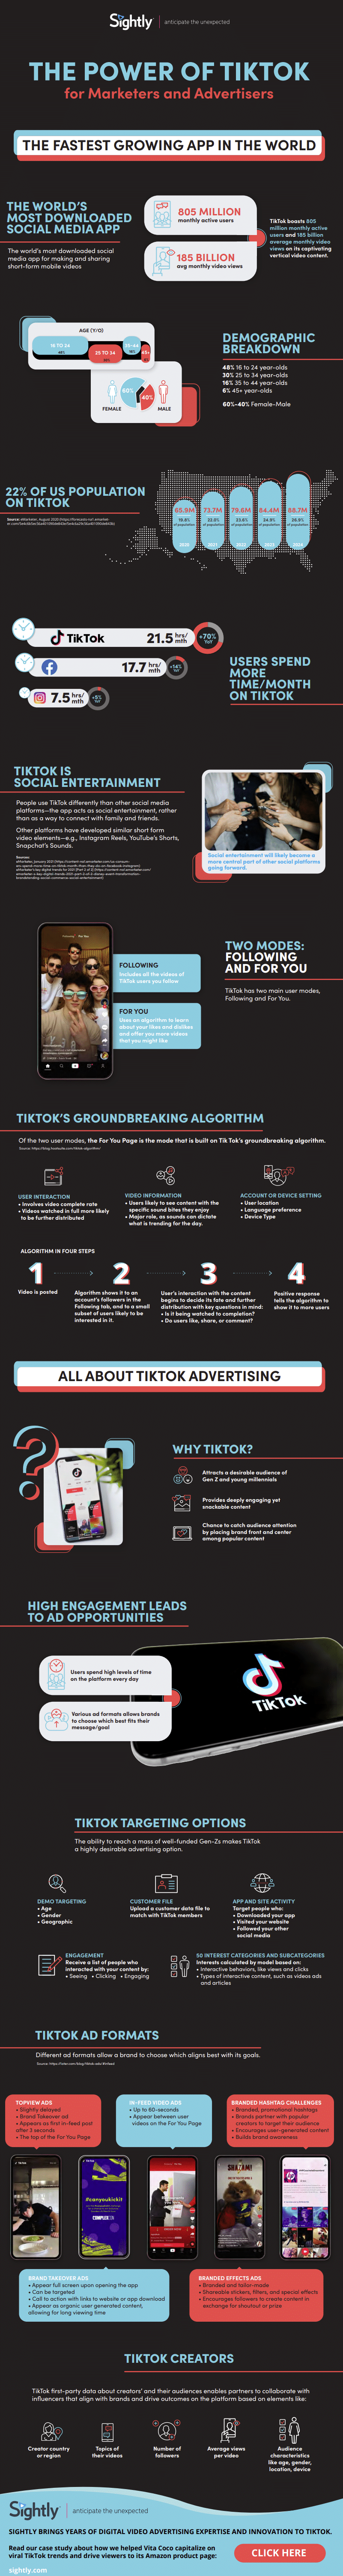 TikTok marketing should be part of your inbound strategy.